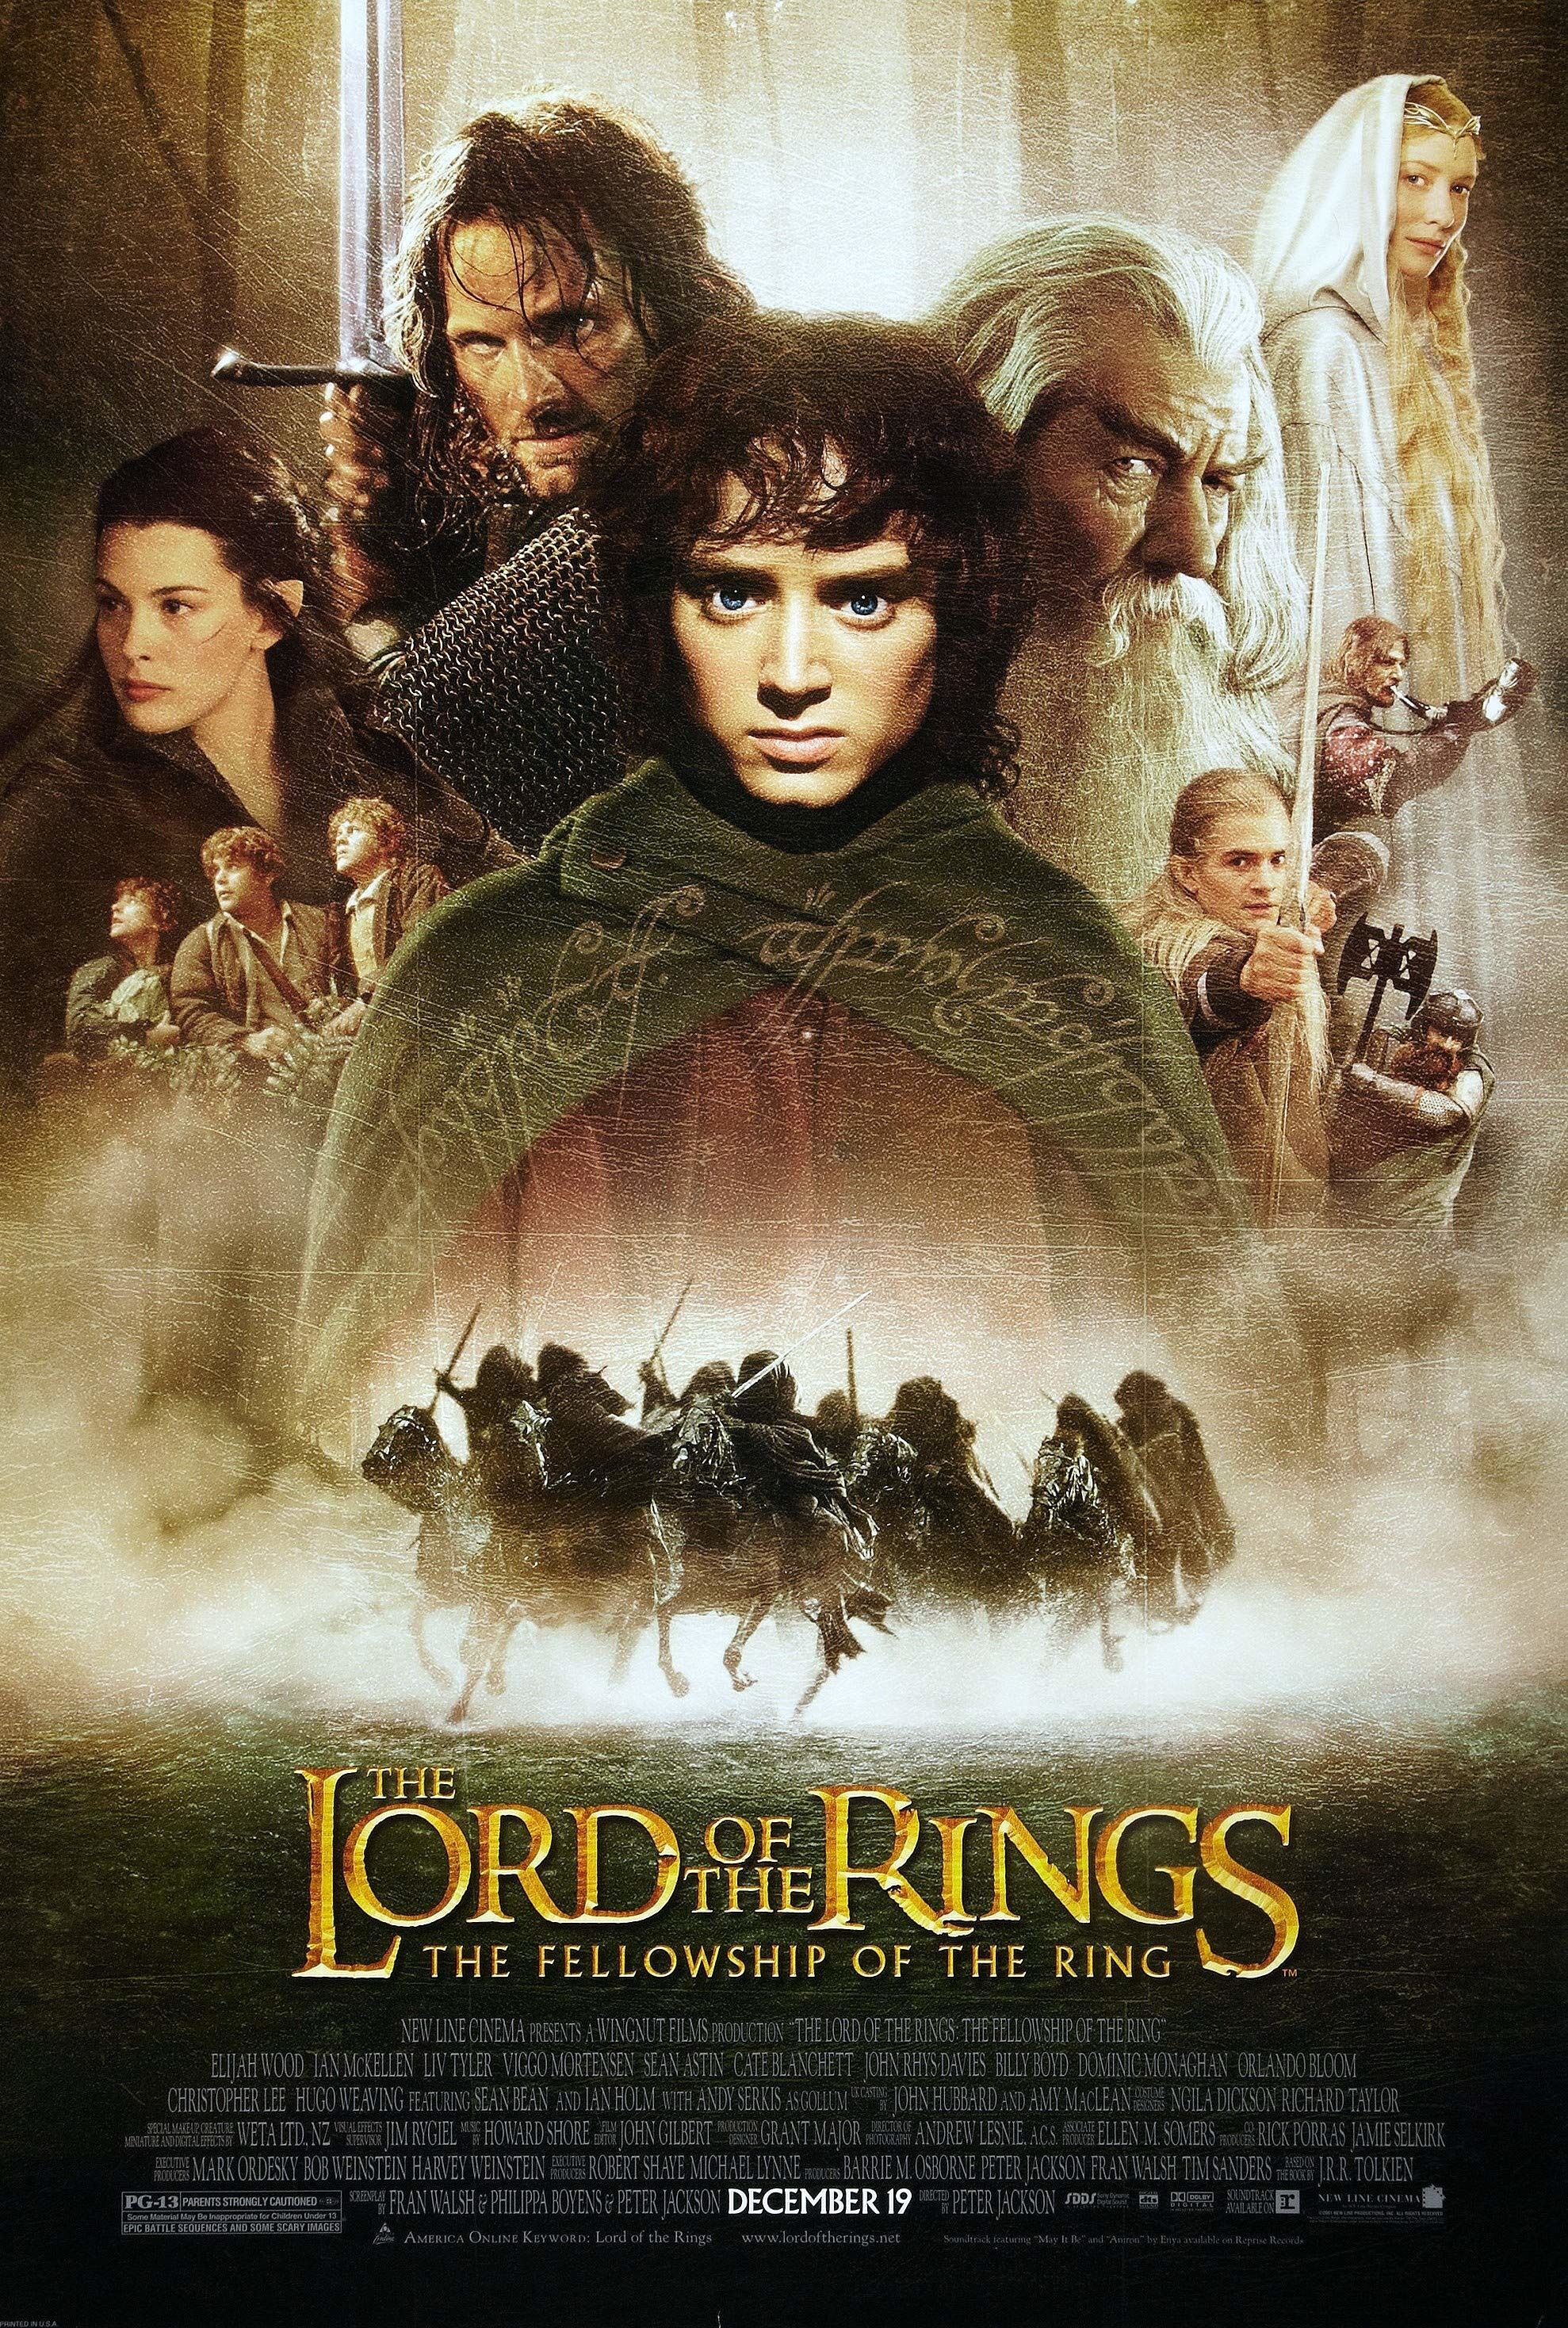 List of the Lord of the Rings film trilogy characters and cast members, The One Wiki to Rule Them All